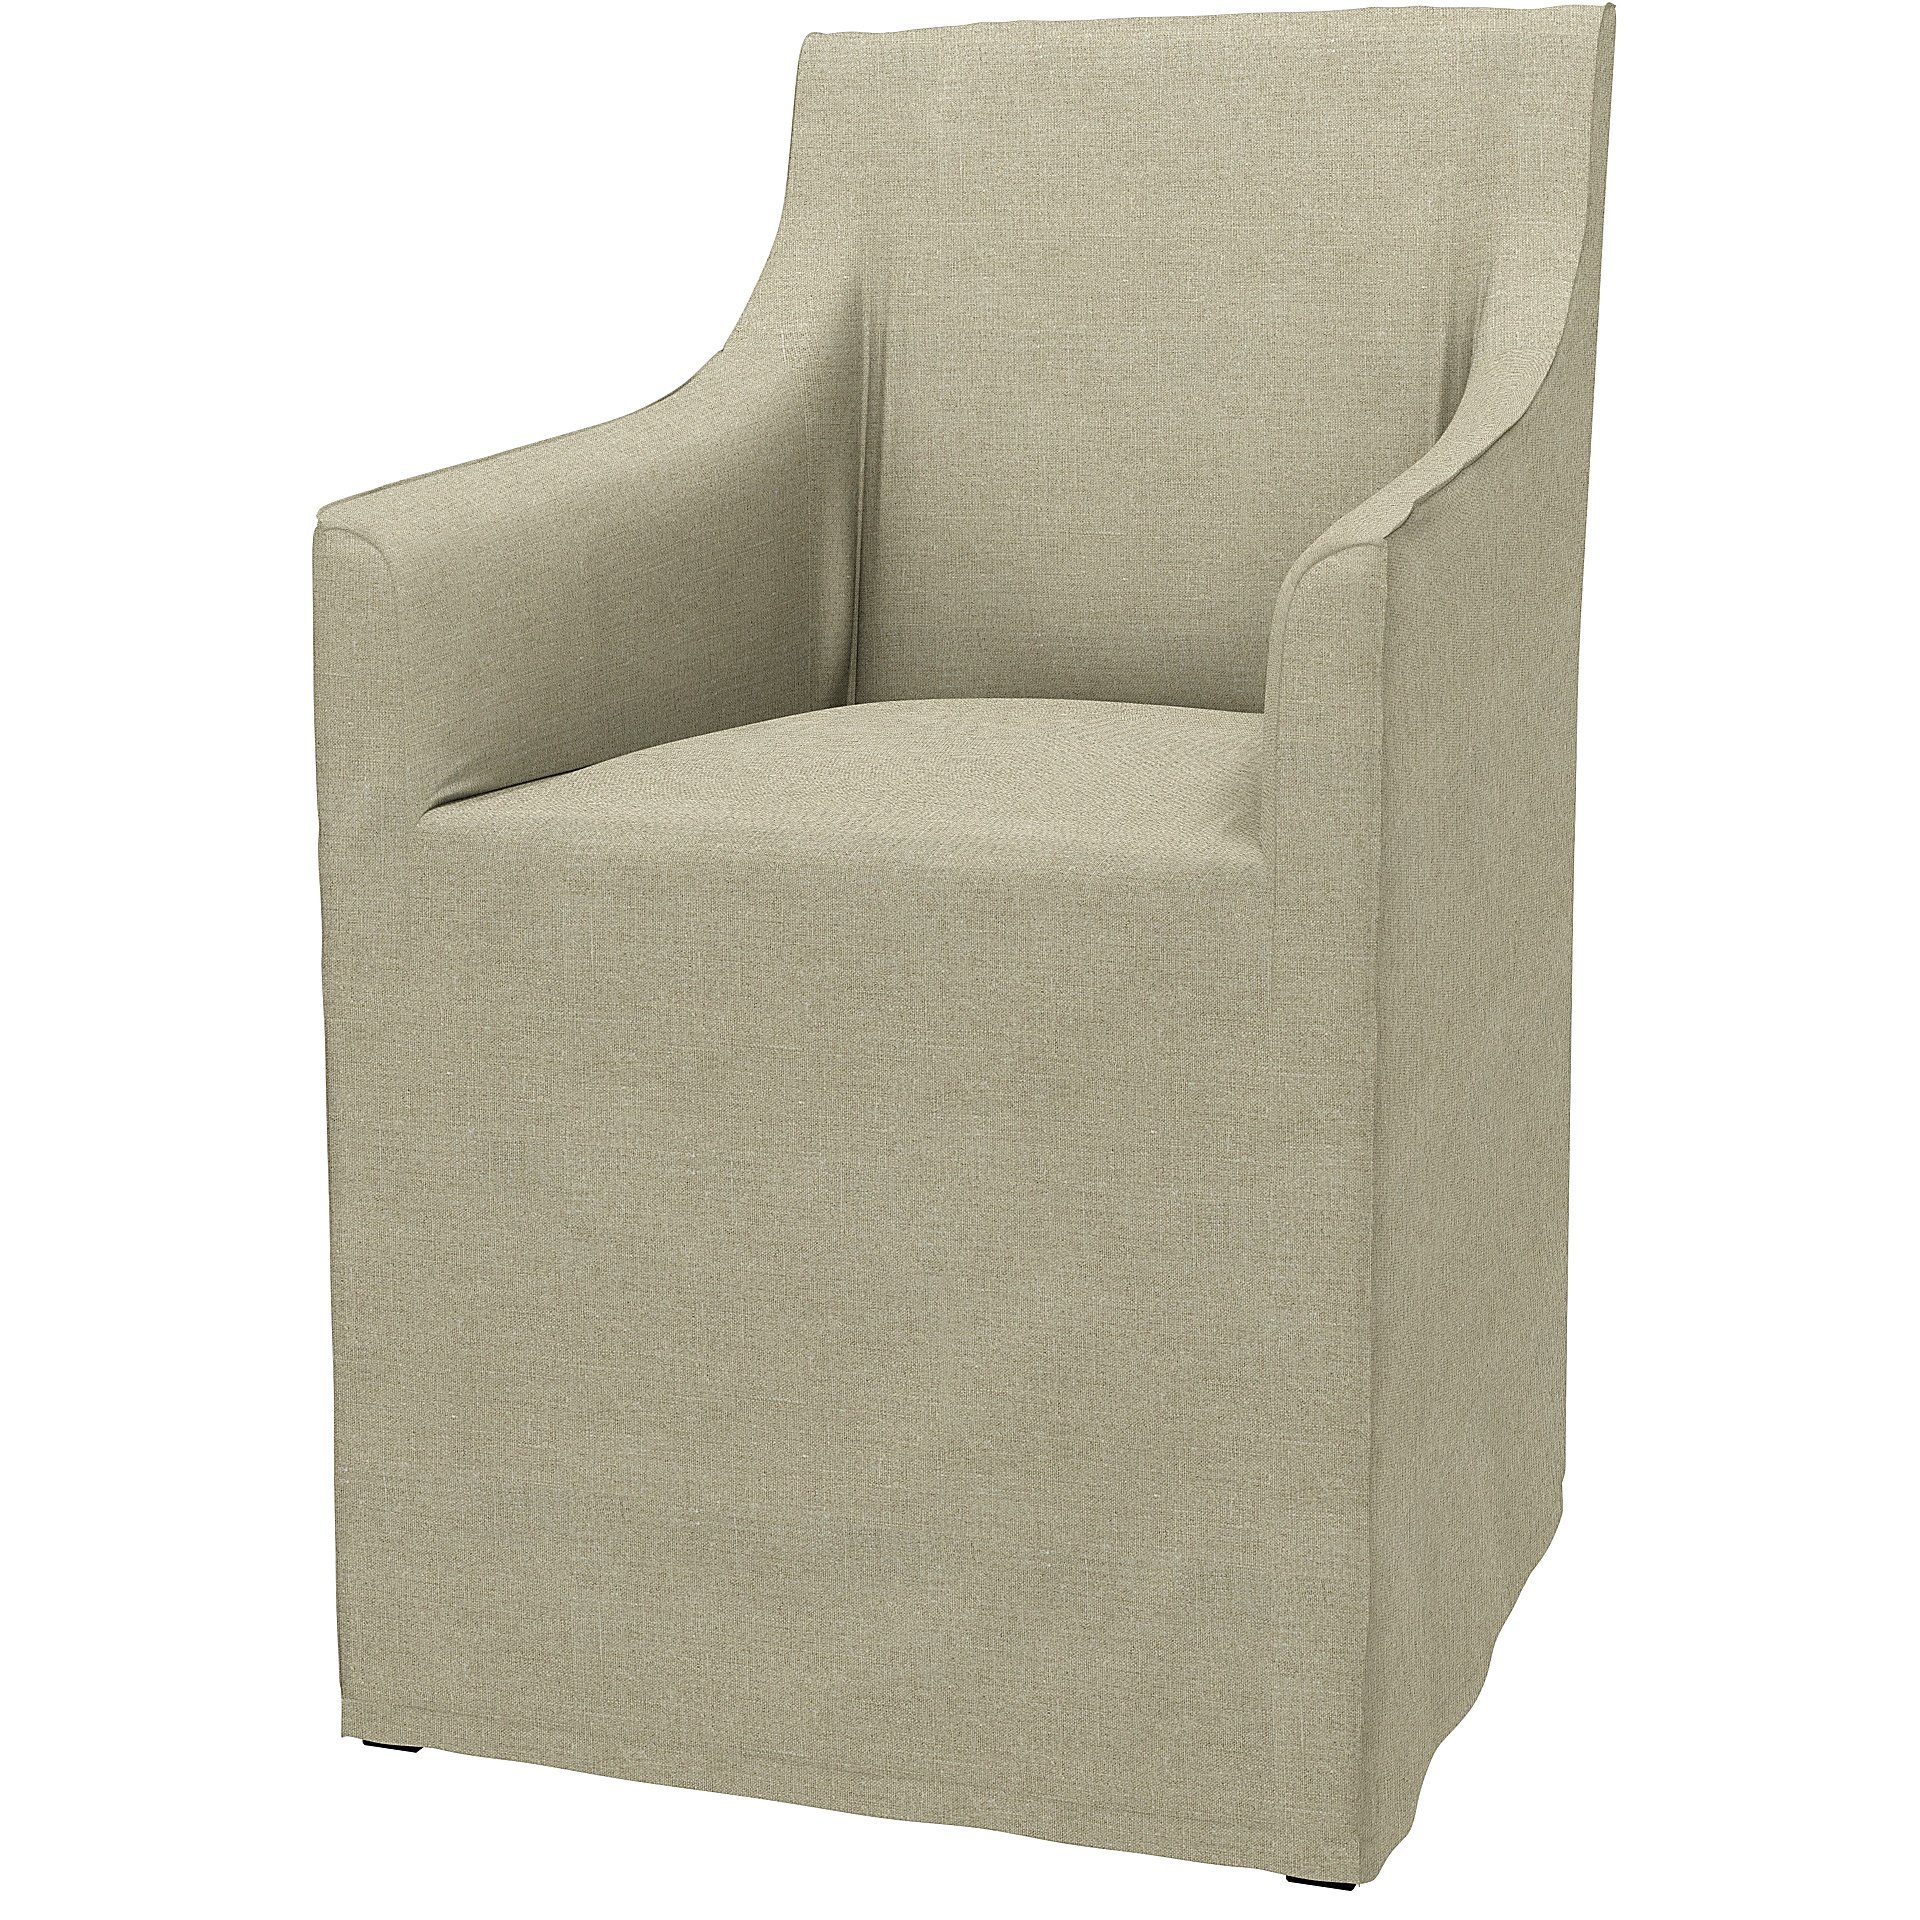 IKEA - Sakarias Chair with Armrests Cover, Pebble, Linen - Bemz